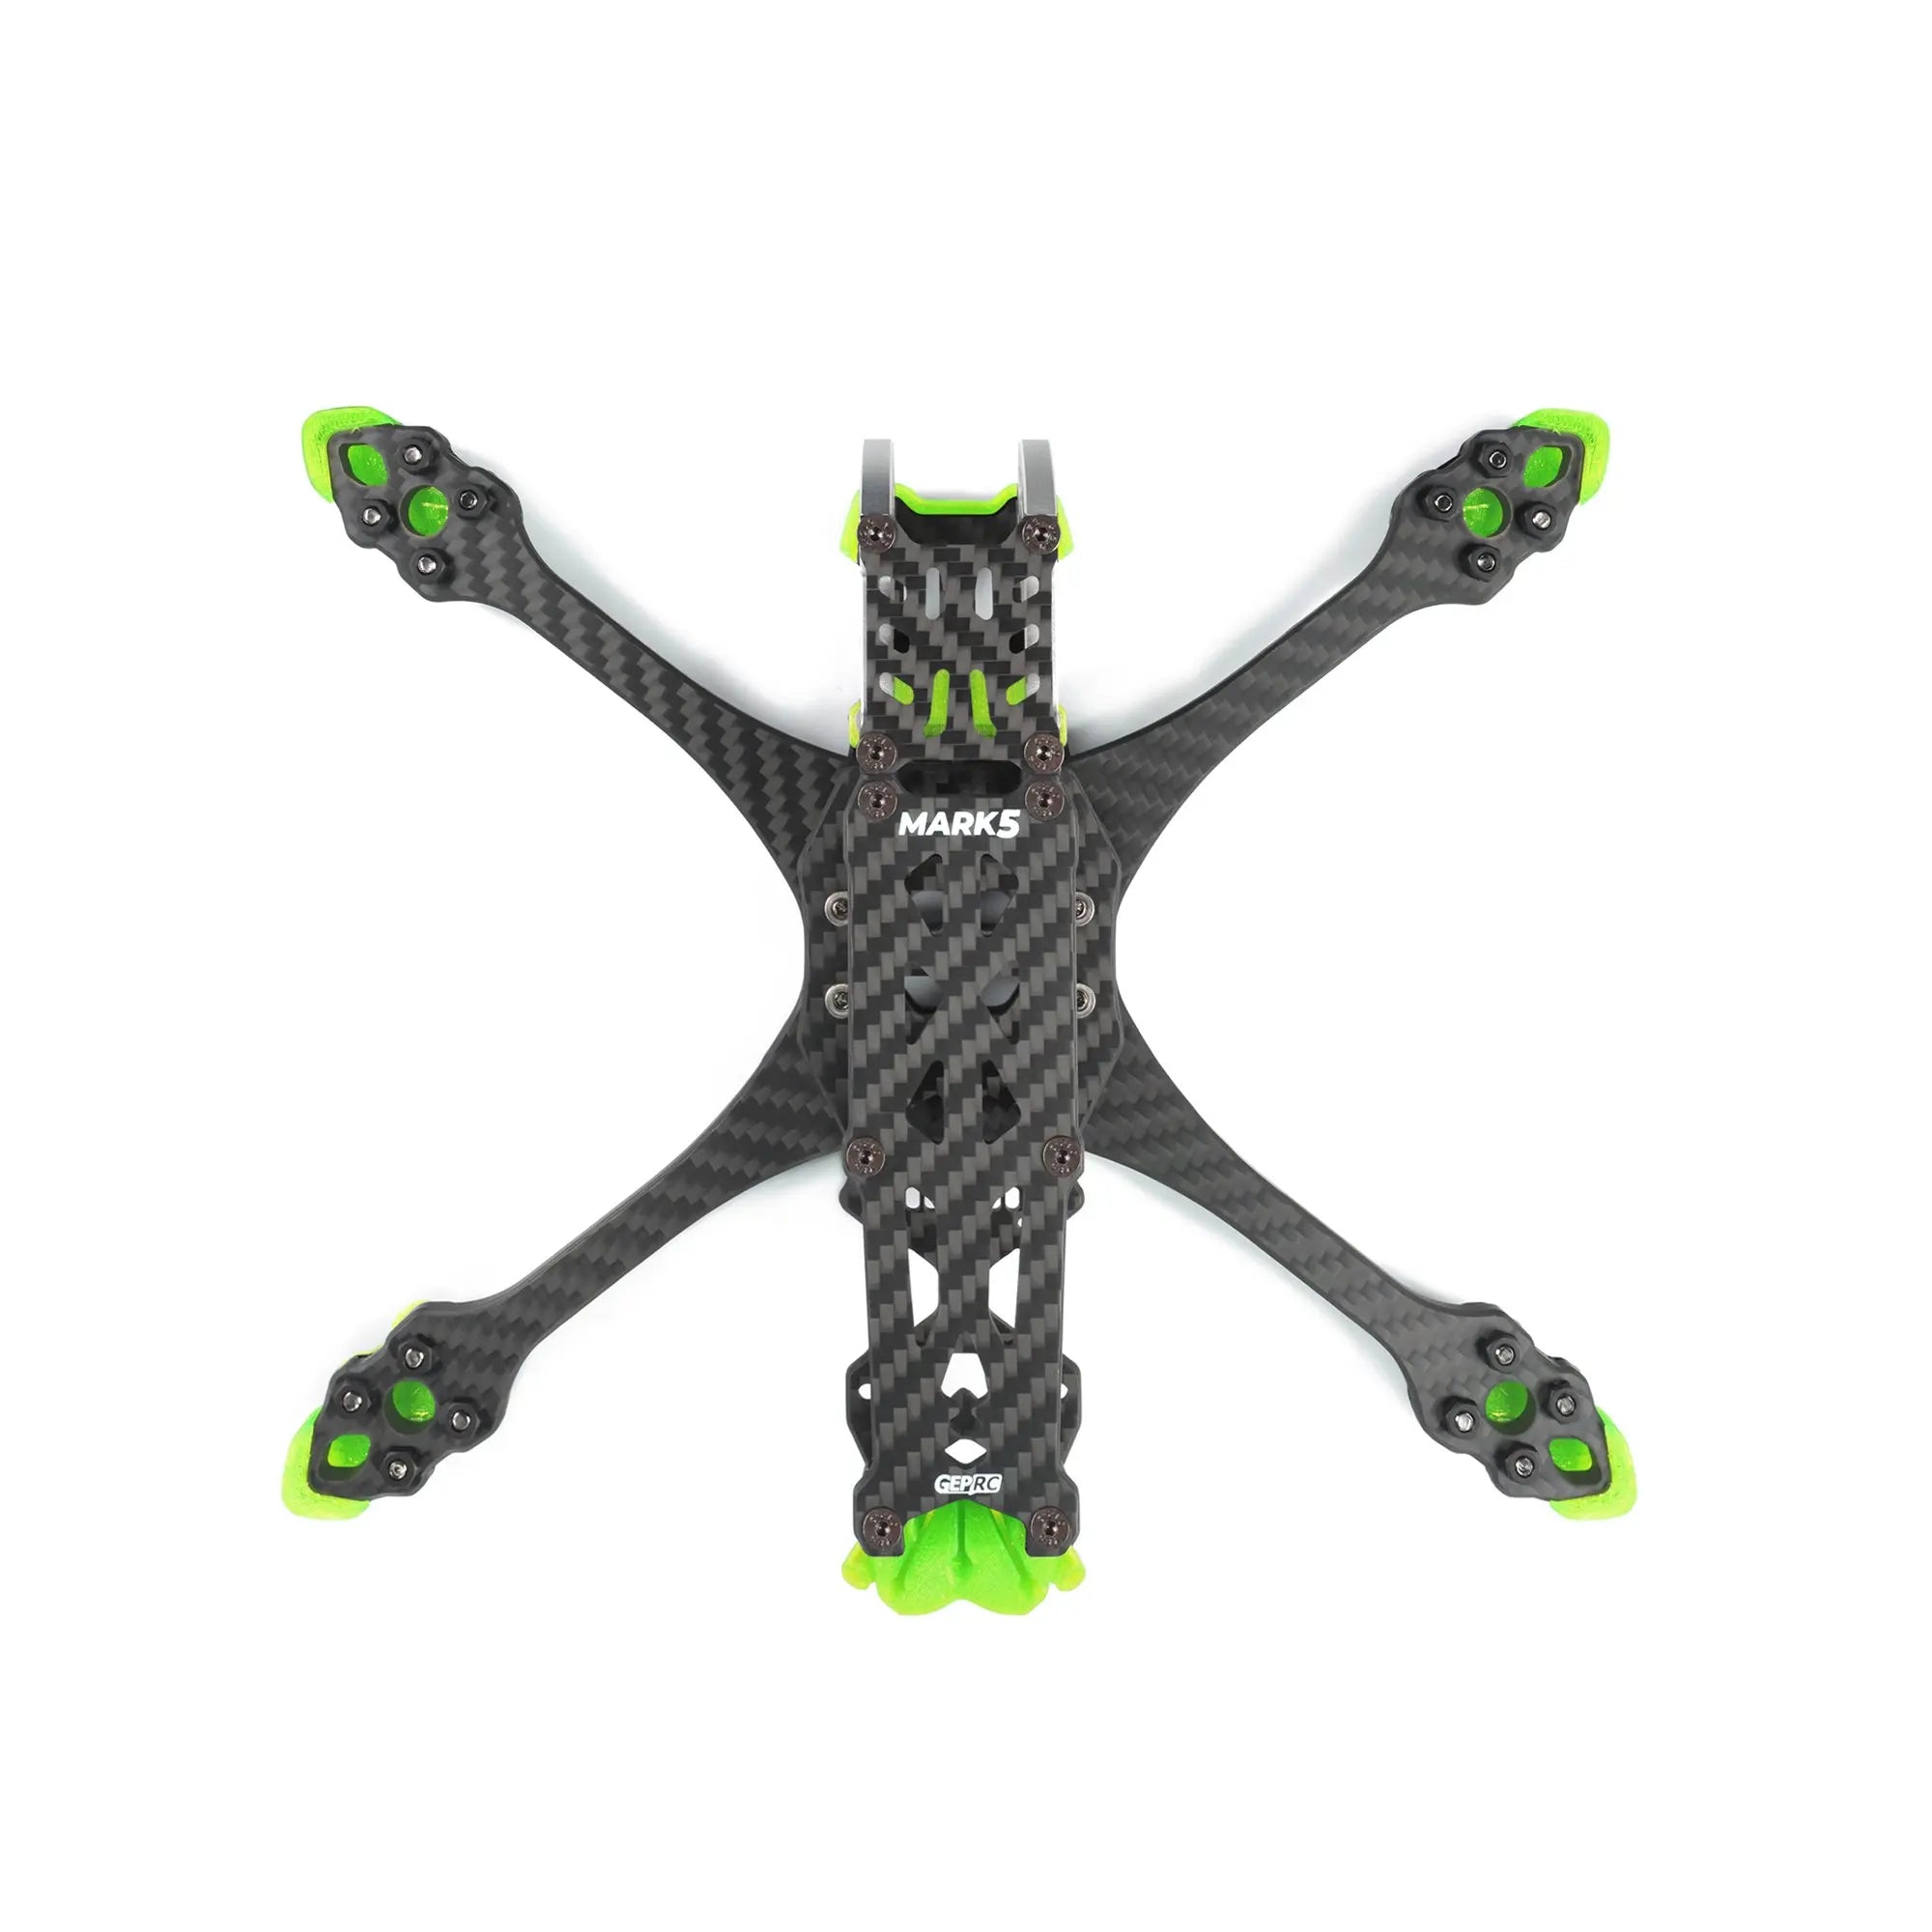 GEPRC GEP-MK5 Frame, MARK5 frame is developed specifically for freestyle with wide X-arm design